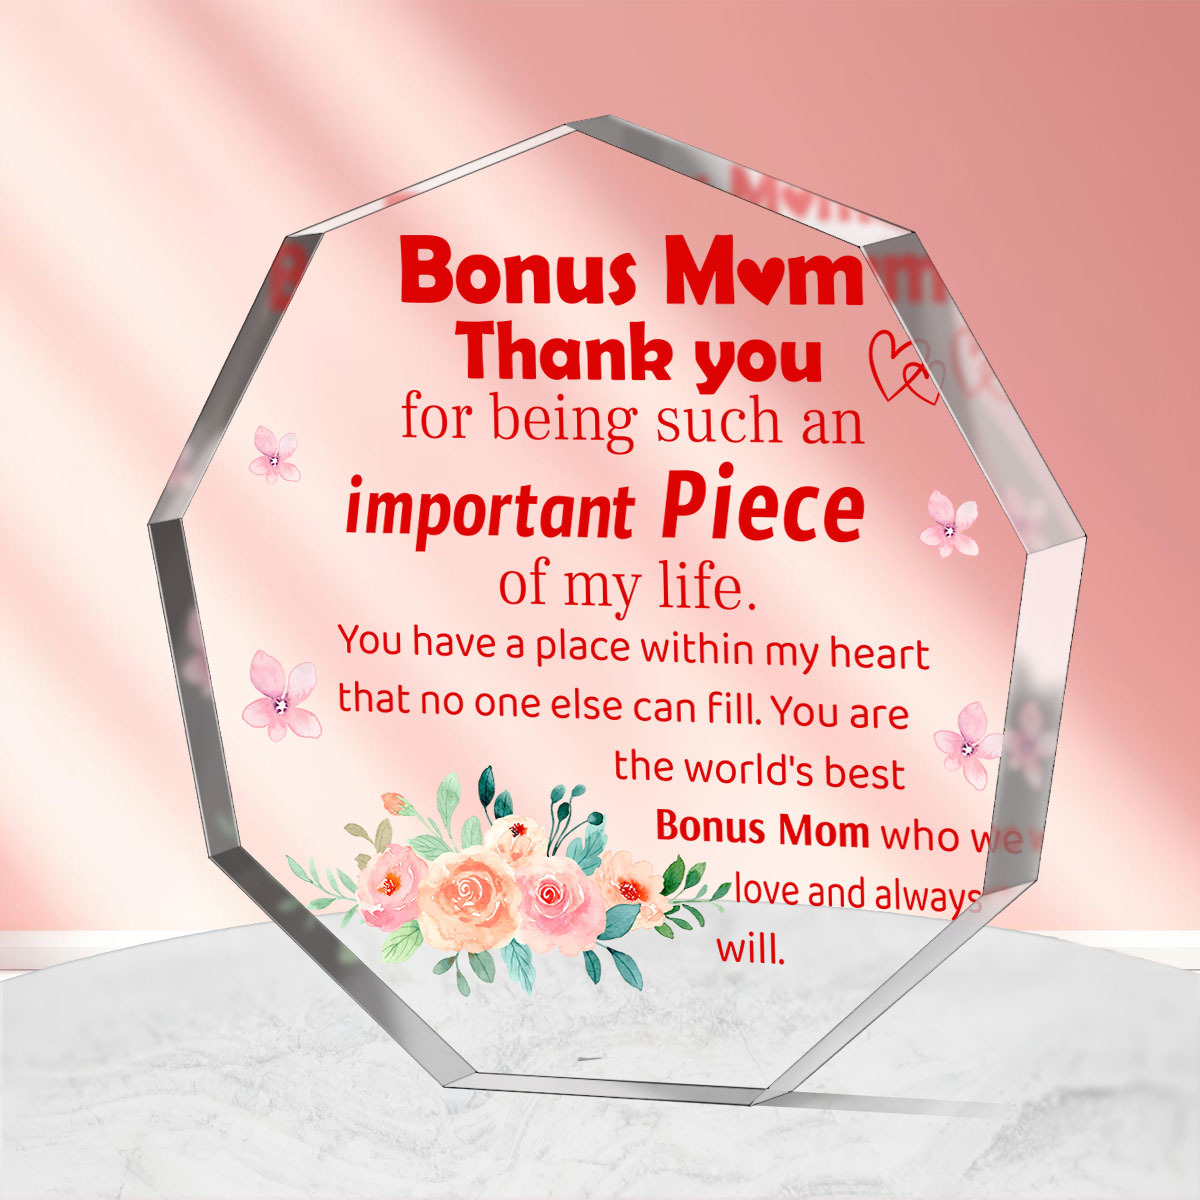 Bonus Mom Birthday Gifts from Daughter Son, Mothers Day Gift for Step Mom,  New Mom, Stepmother, Gifts for Mom Birthday Unique Thank You Mom Gifts